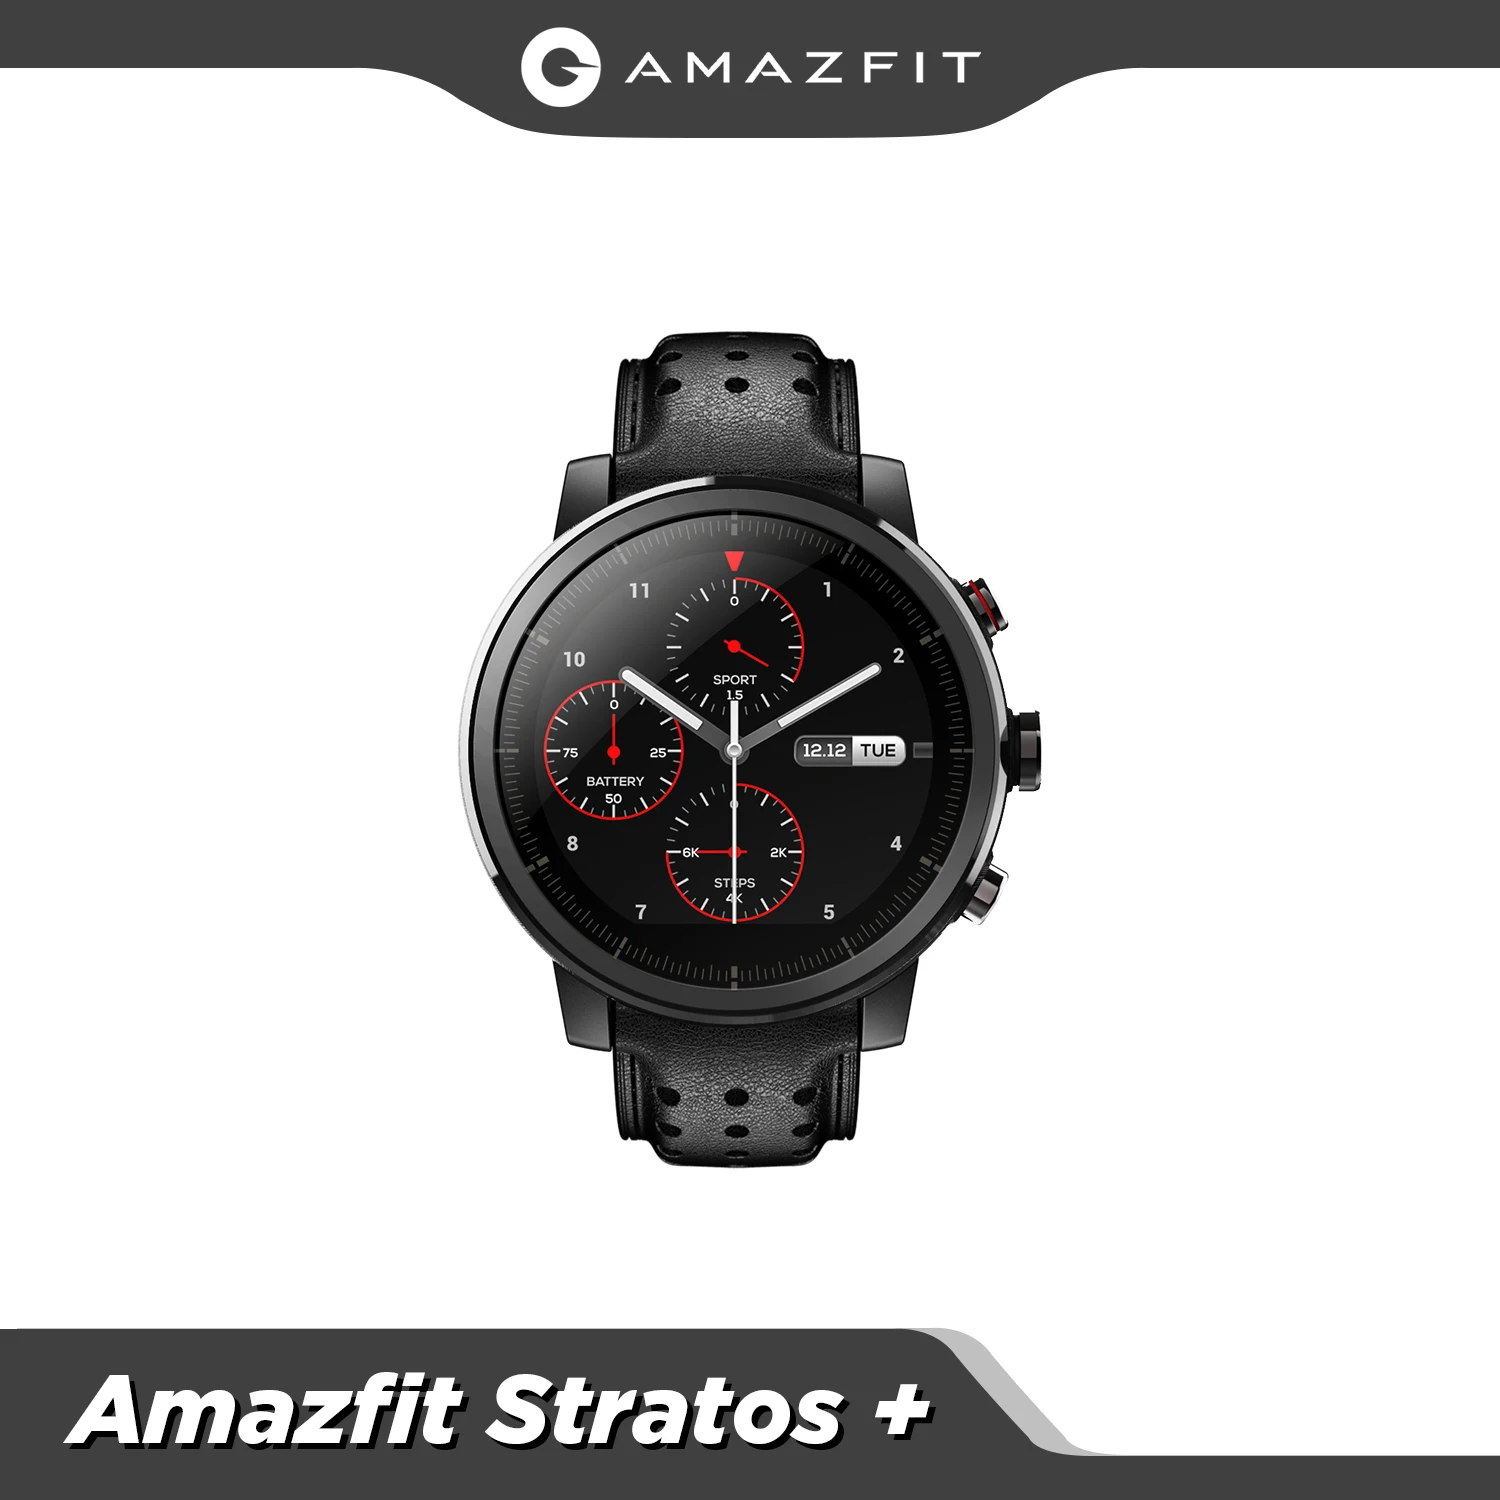 Permalink to 2019 New Amazfit Stratos+ Flagship Smart Watch Genuie Leather Strap Gift Box Sapphire 2S